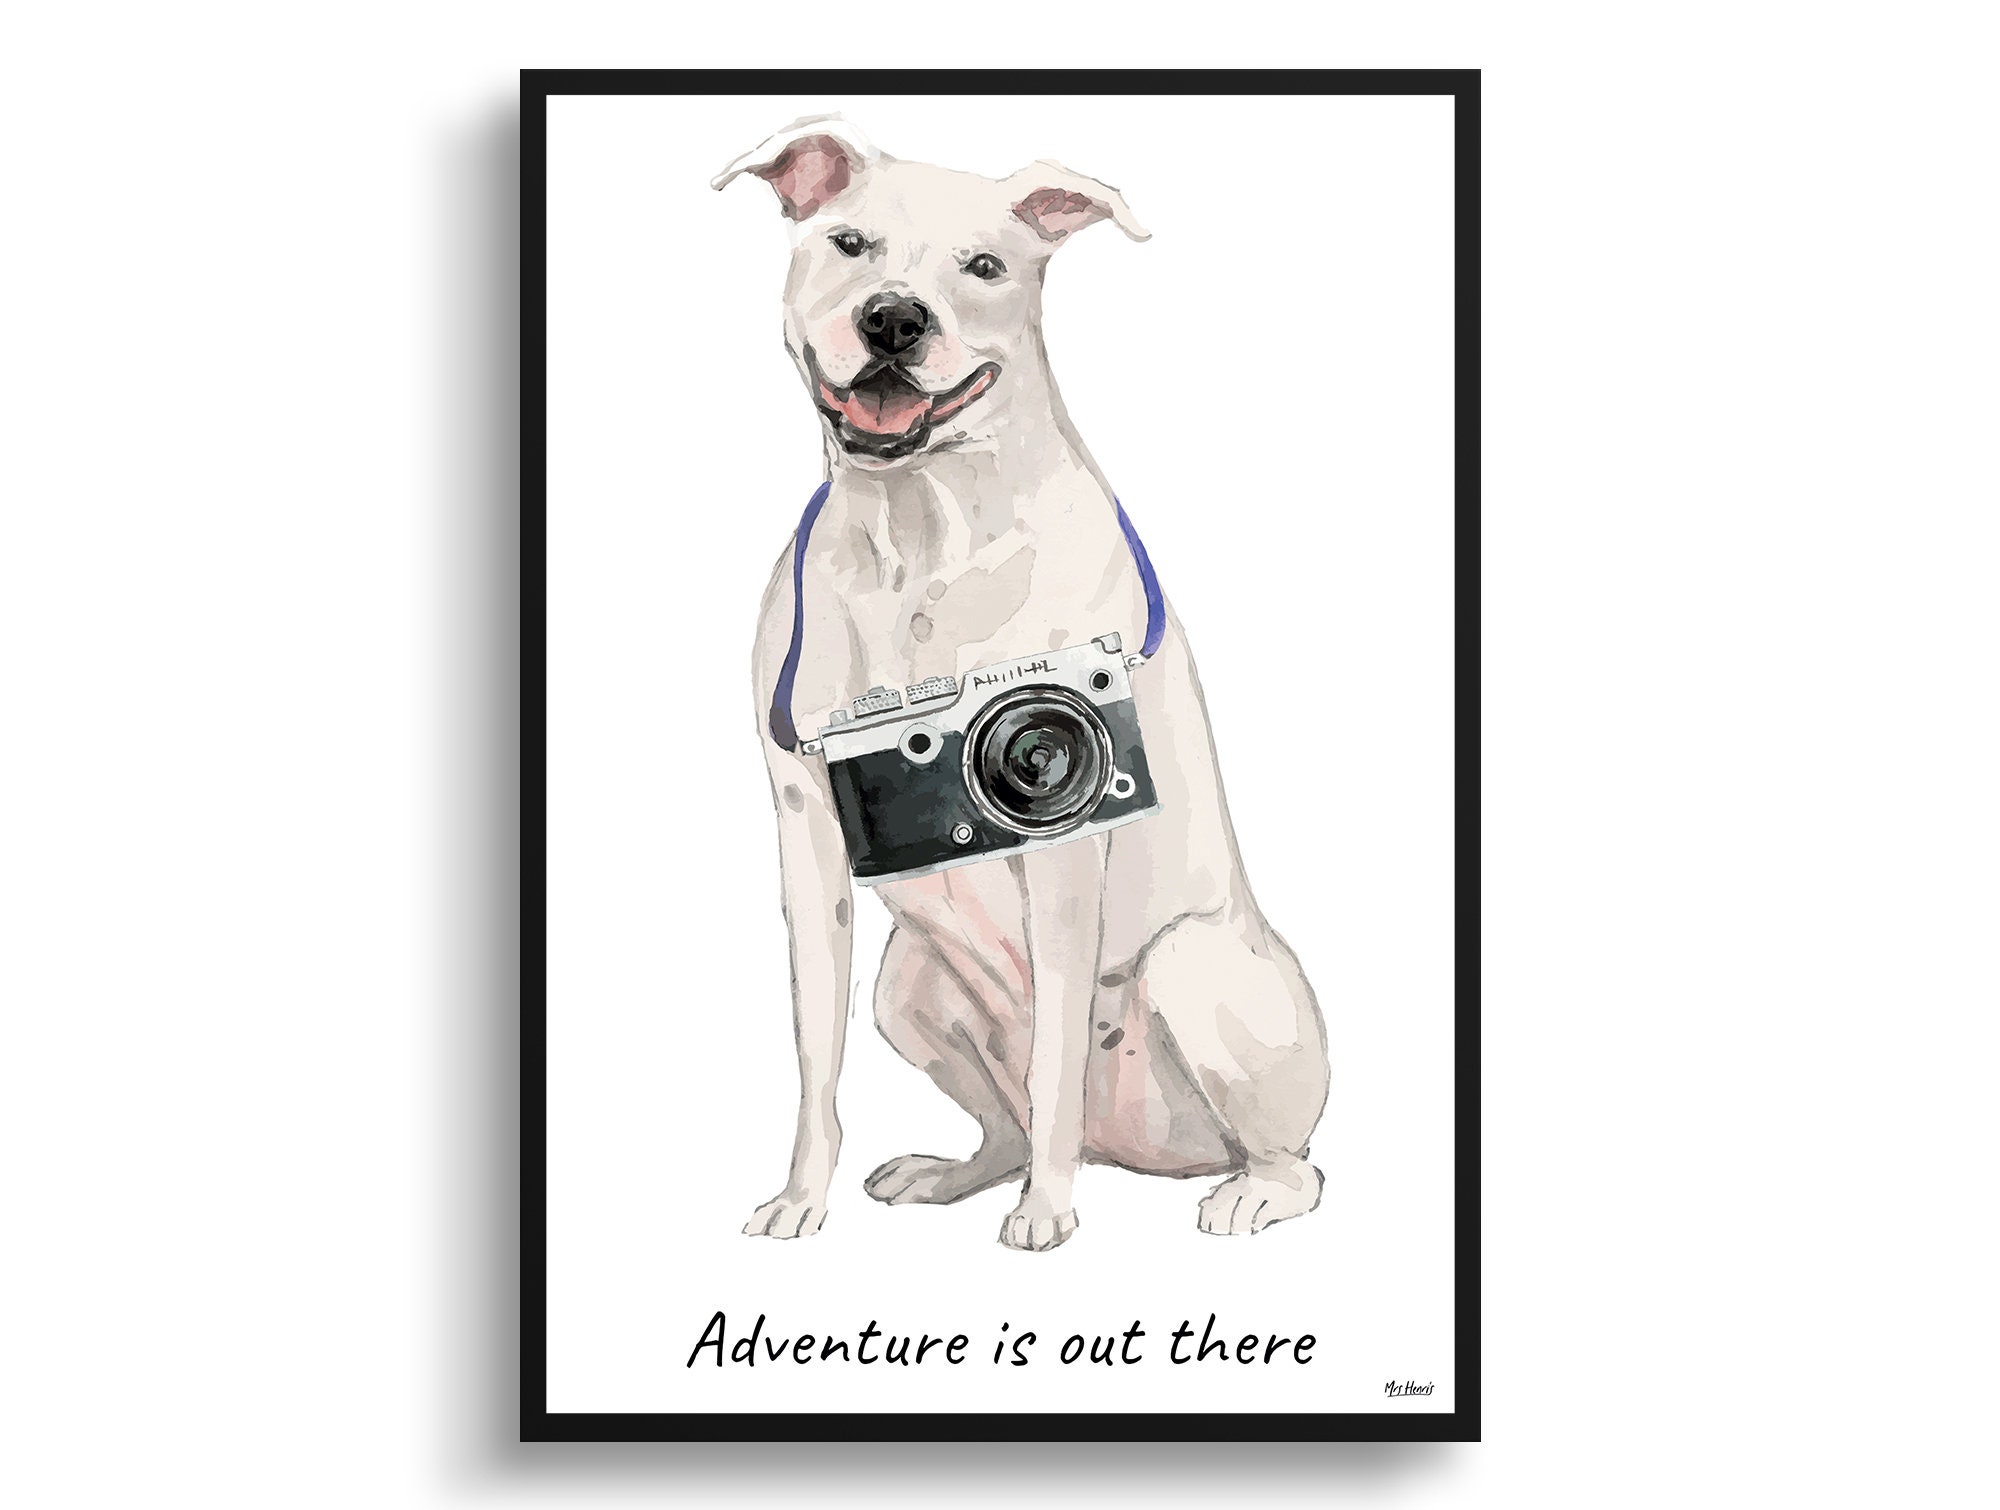 Adventure Is Out There White American Staffordshire Terrier Dog Print Illustration. Framed & Un-Framed Wall Art Options. Personalised Name